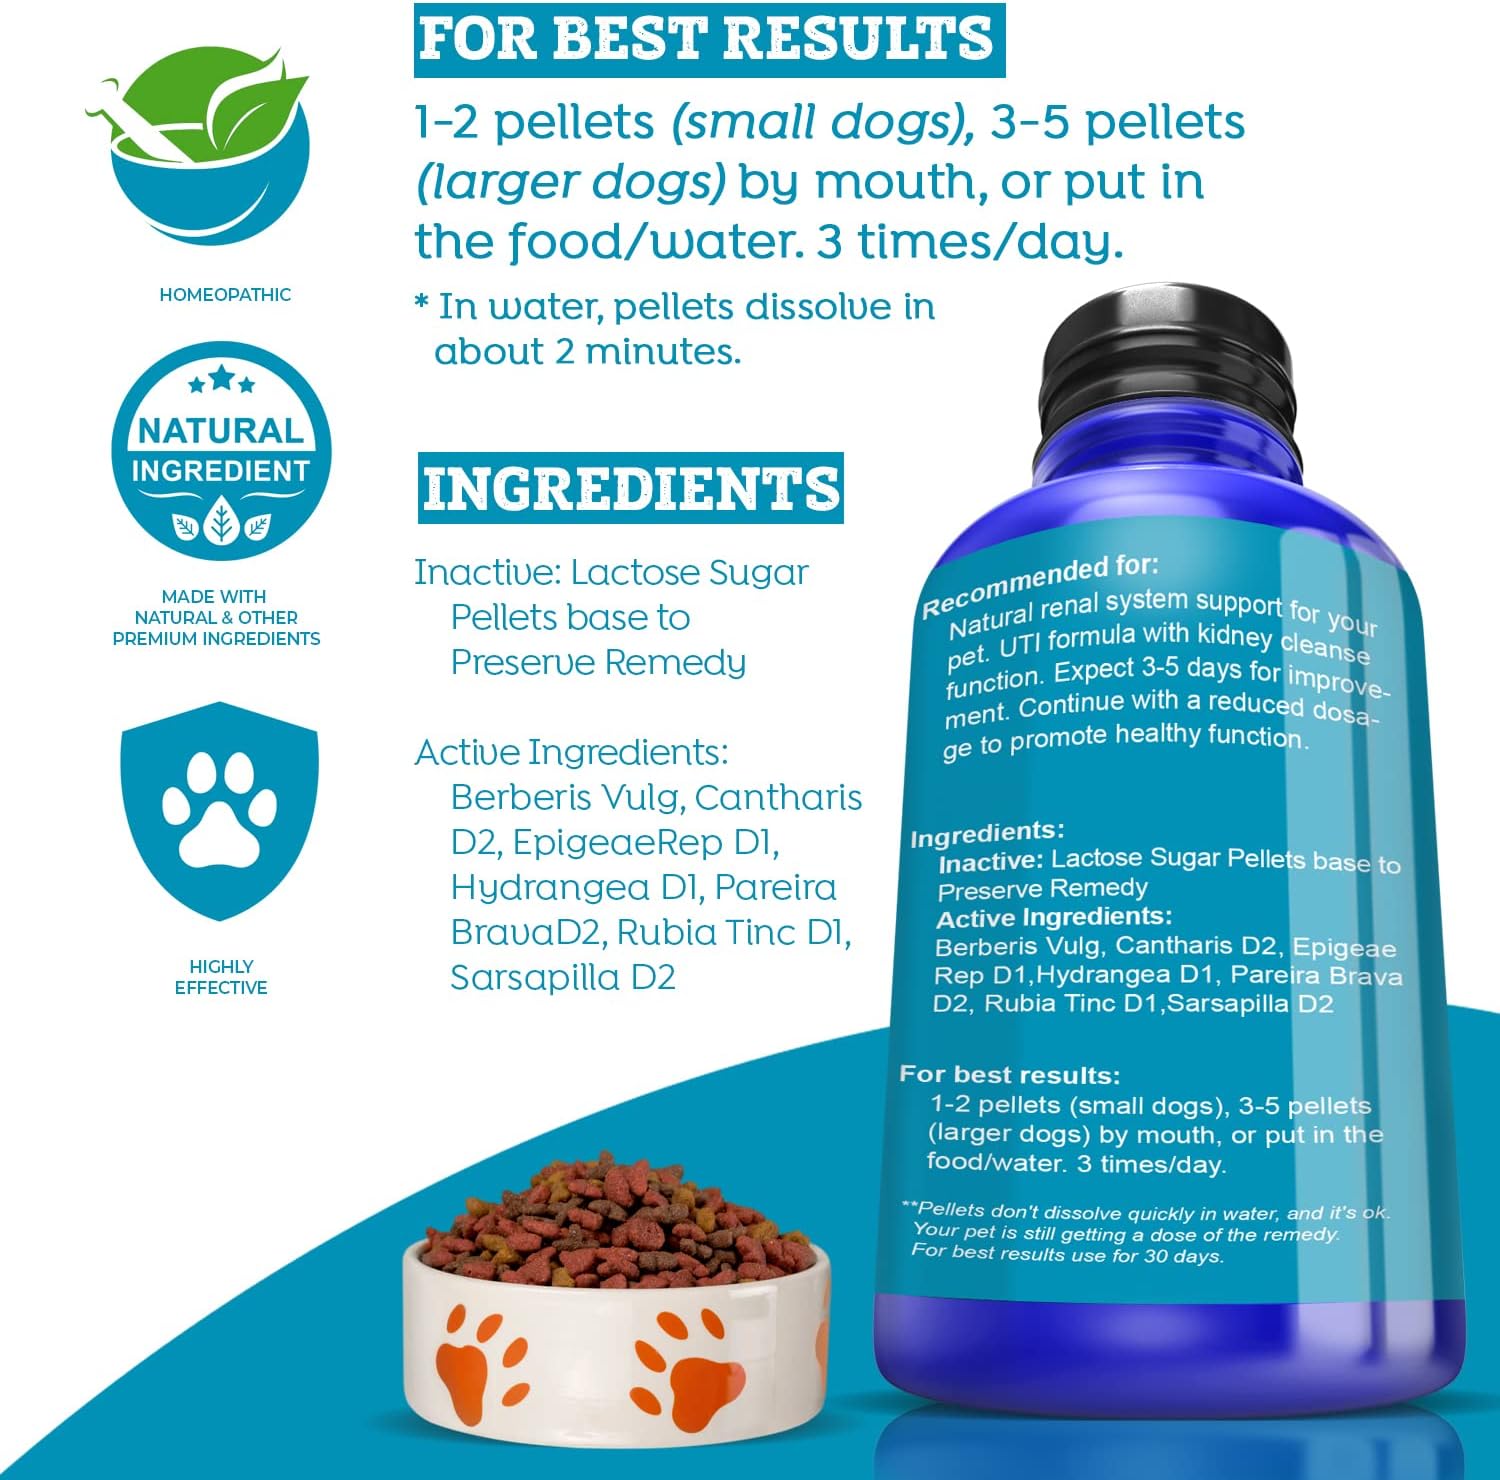 Healthy Animals 4 Ever Urinary Support for Bladder and Kidneys for Dogs - for Urinary Tract Infections & Renal Cleansing - Natural, Homeopathic, Non-GMO, Organic - Preservative, Chemical Free - 300 ct